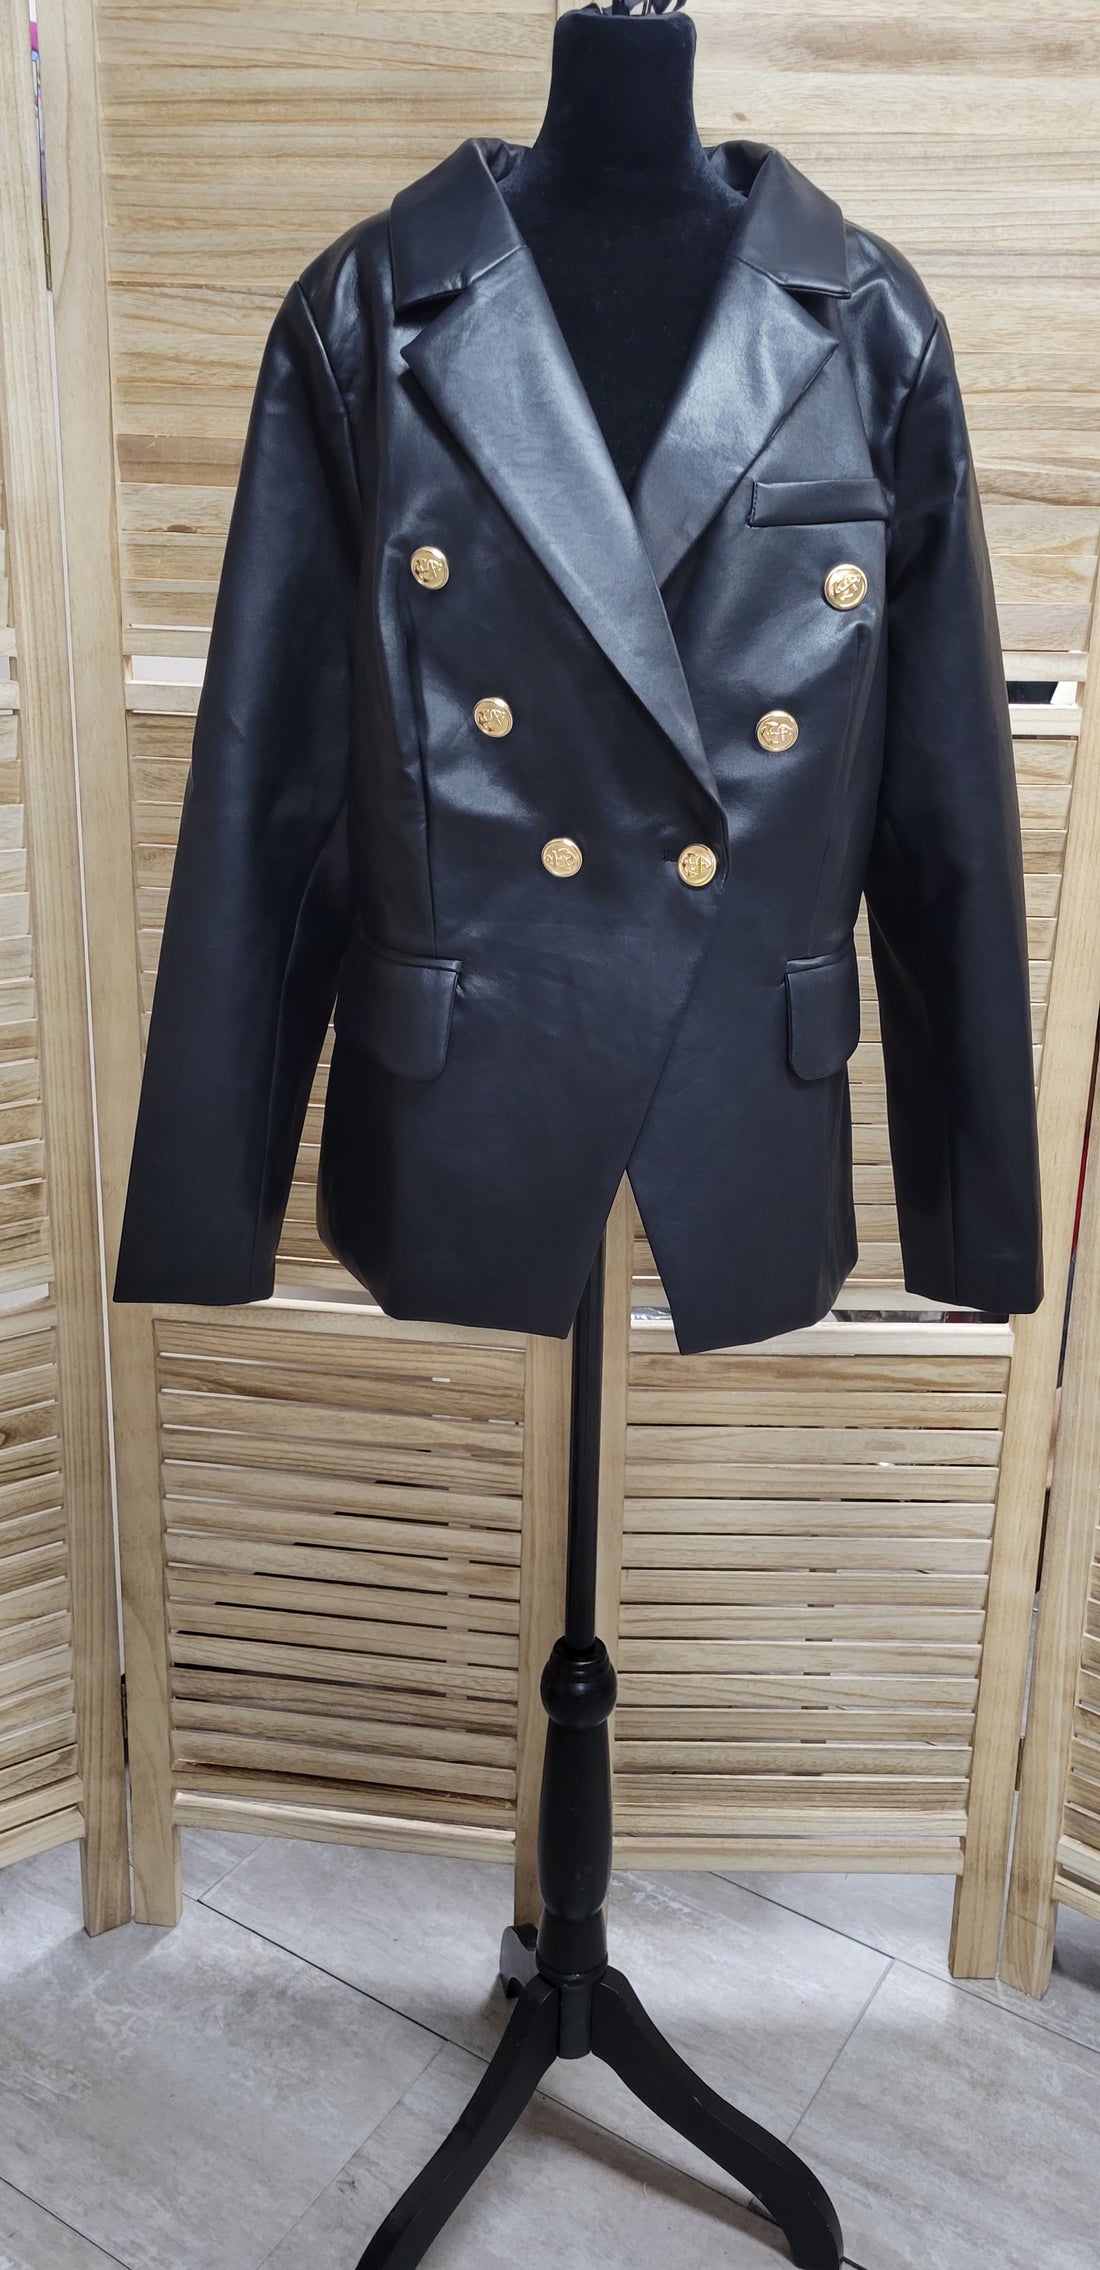 faux leather black double breasted blazer with pockets shoulder pads and pockets, gold accent buttons